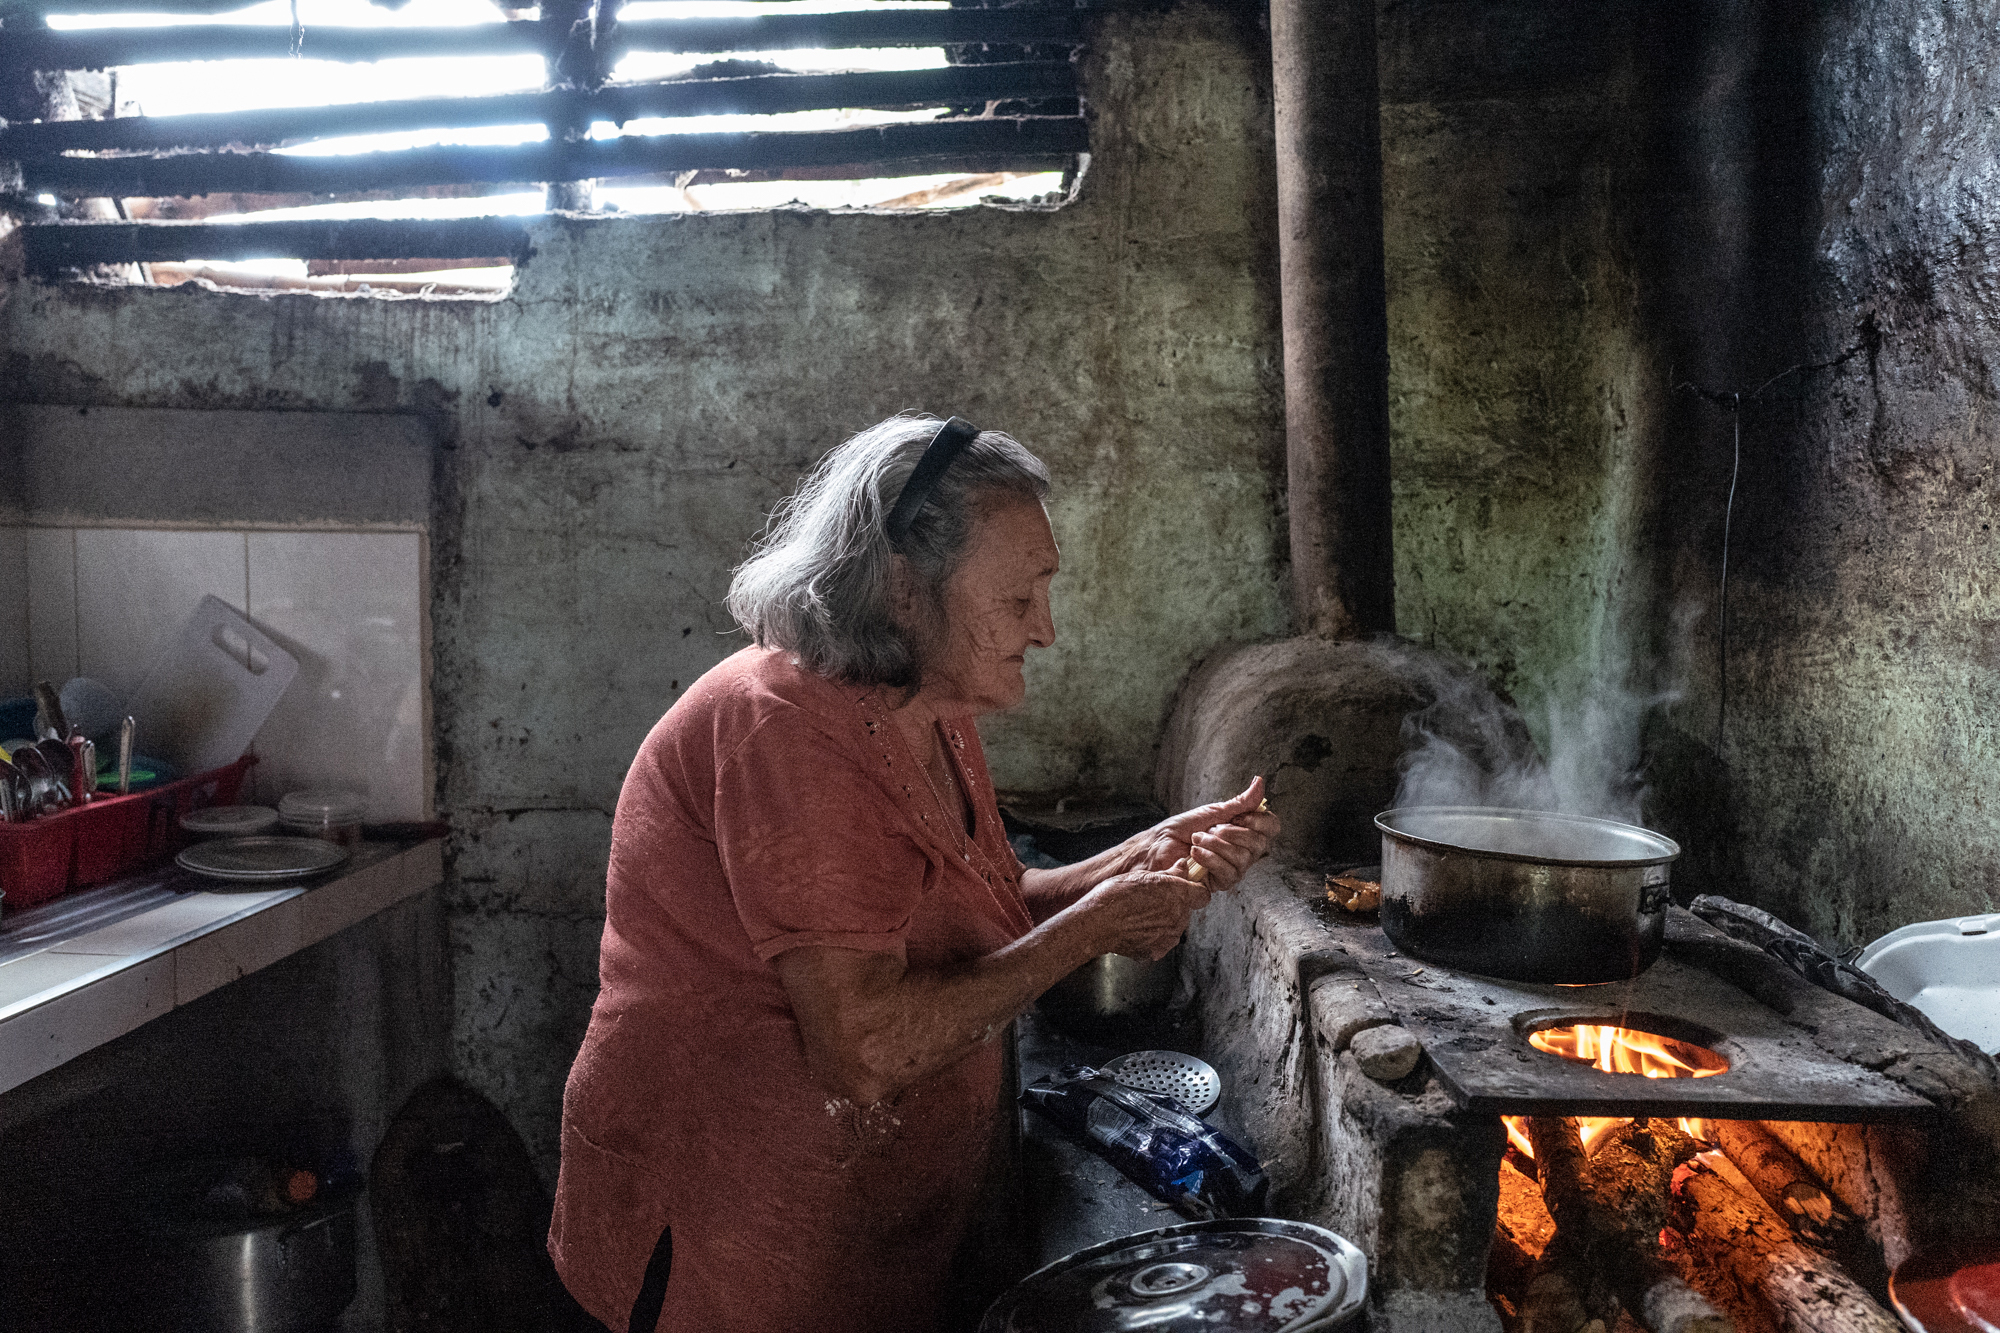 Mercedes Triviño cooks diner at her home in Ricaurte, Valle del Cauca on July 30, 2018.